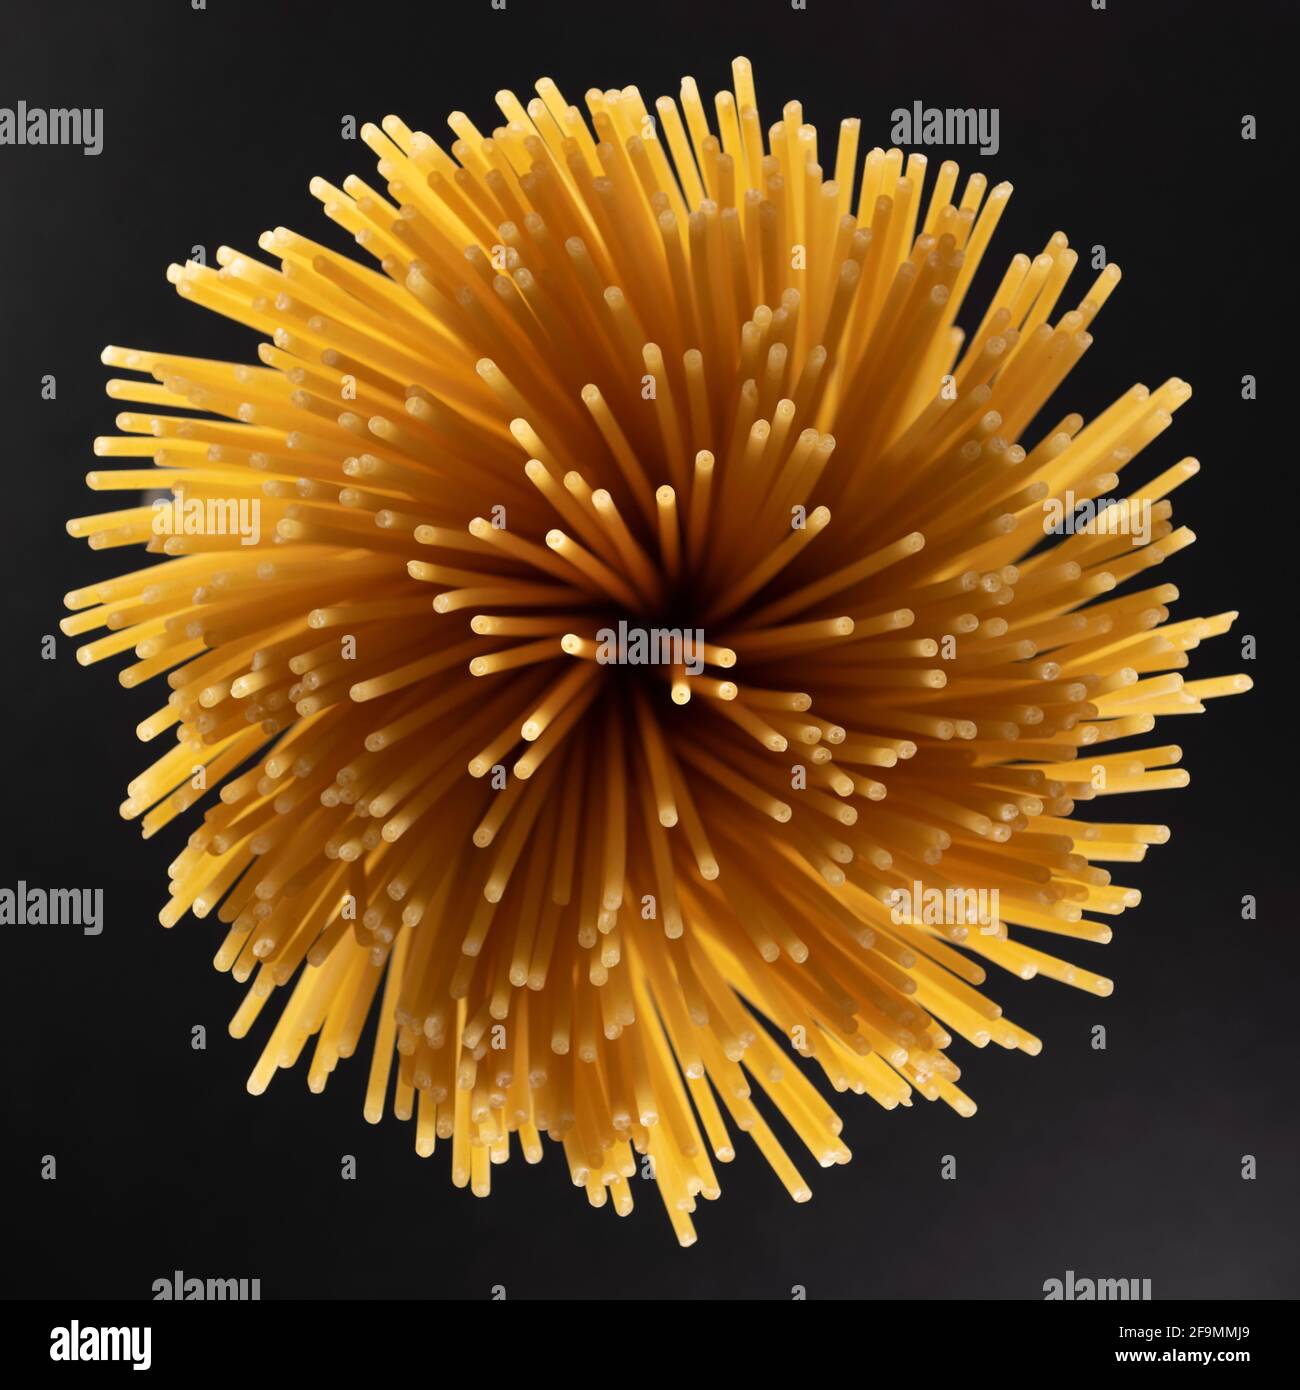 Abstract image of spaghetti, view from above Stock Photo